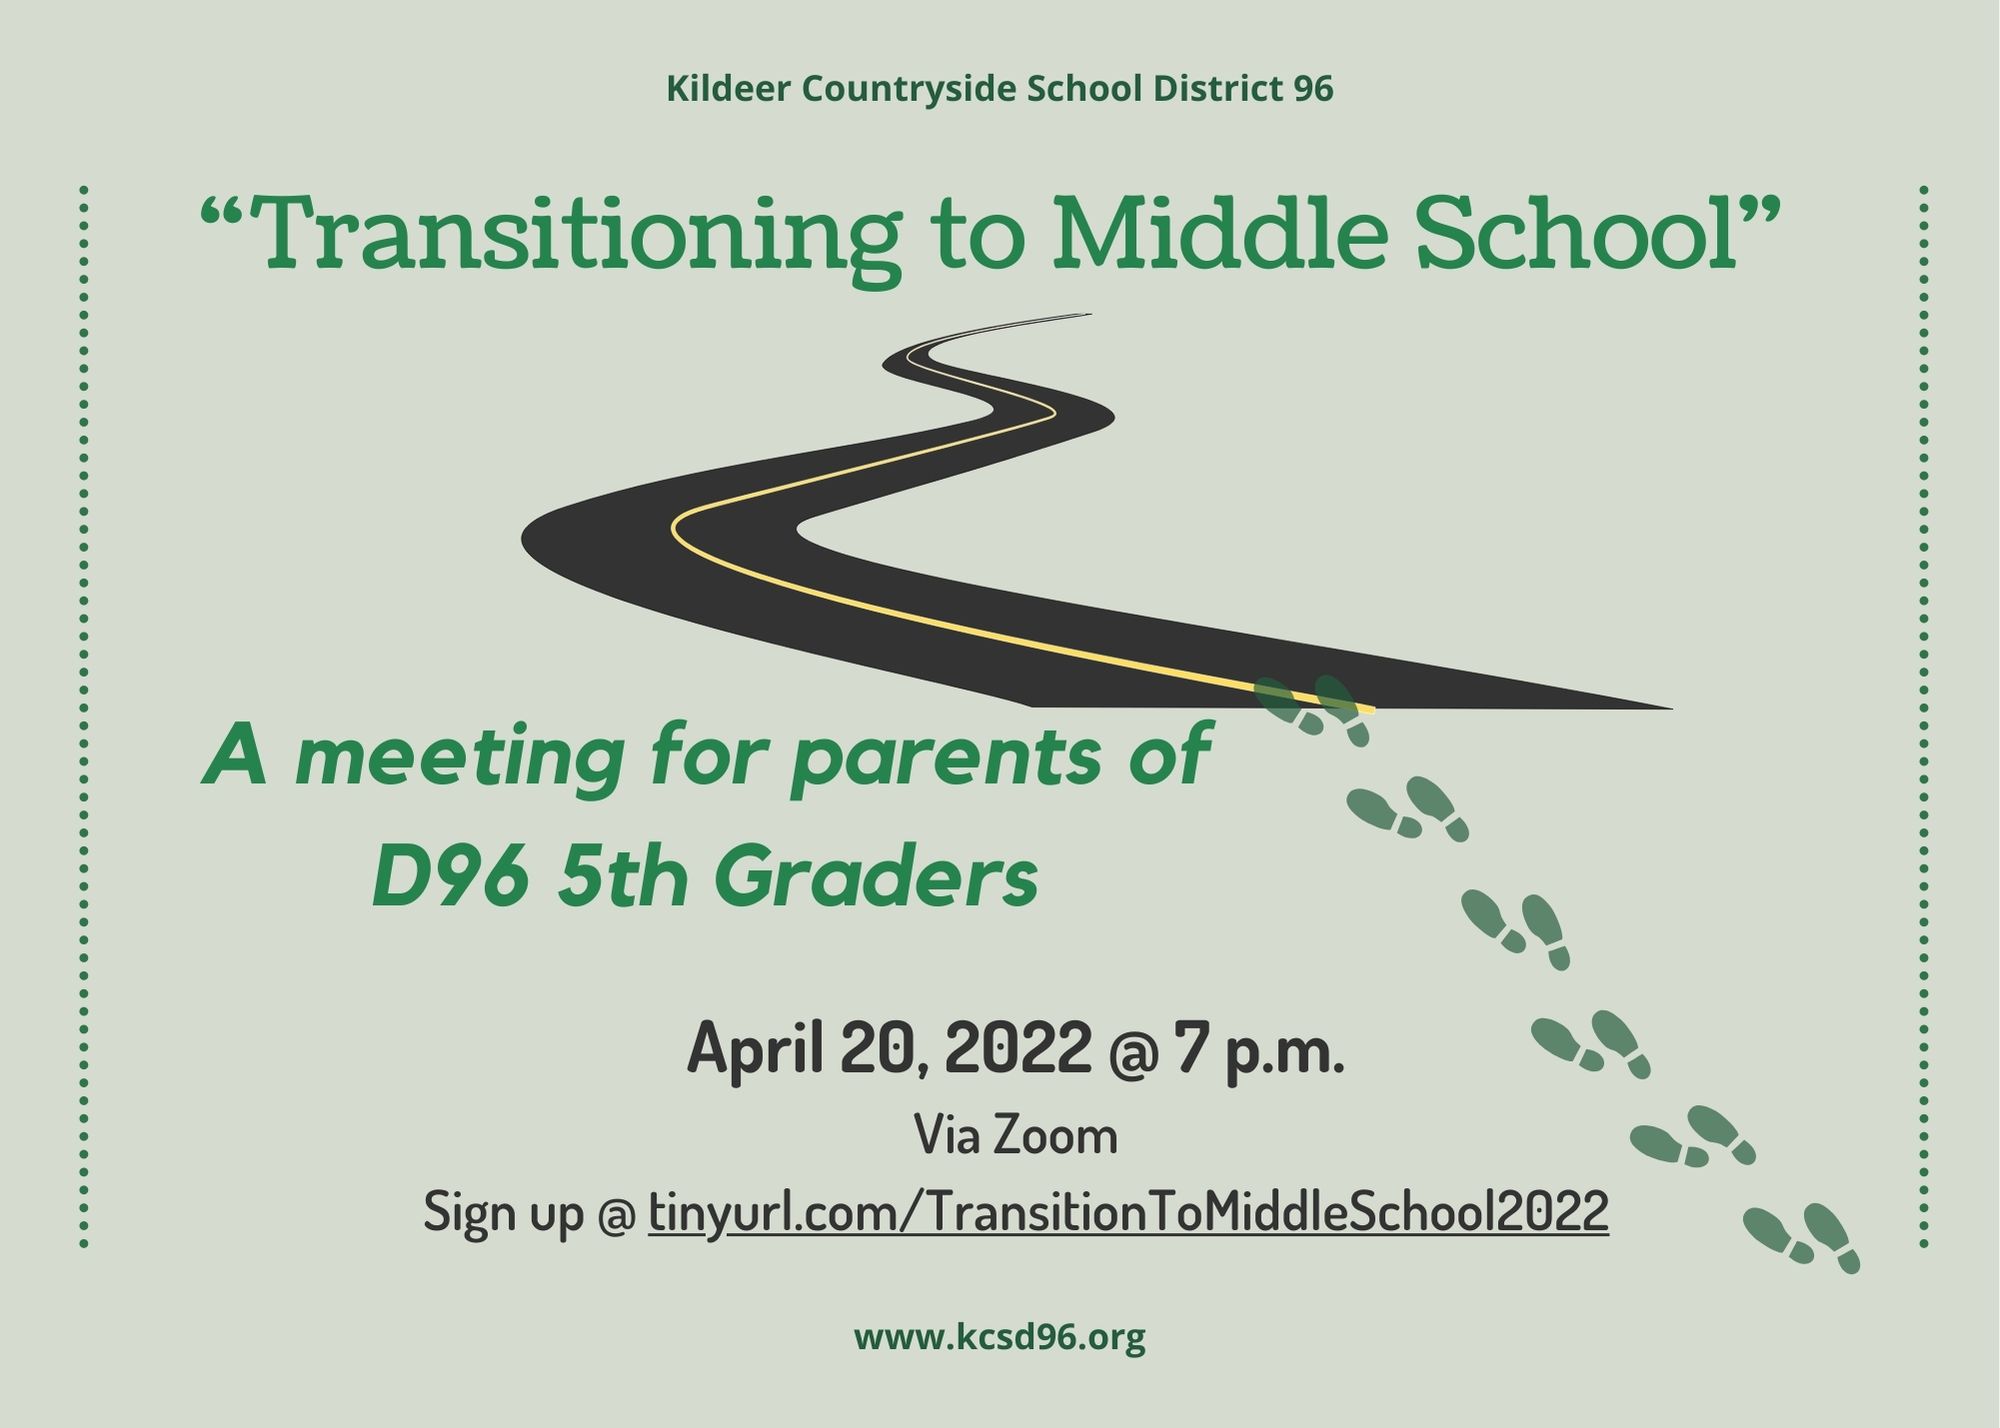 Transition to Middle School on April 20, 2022